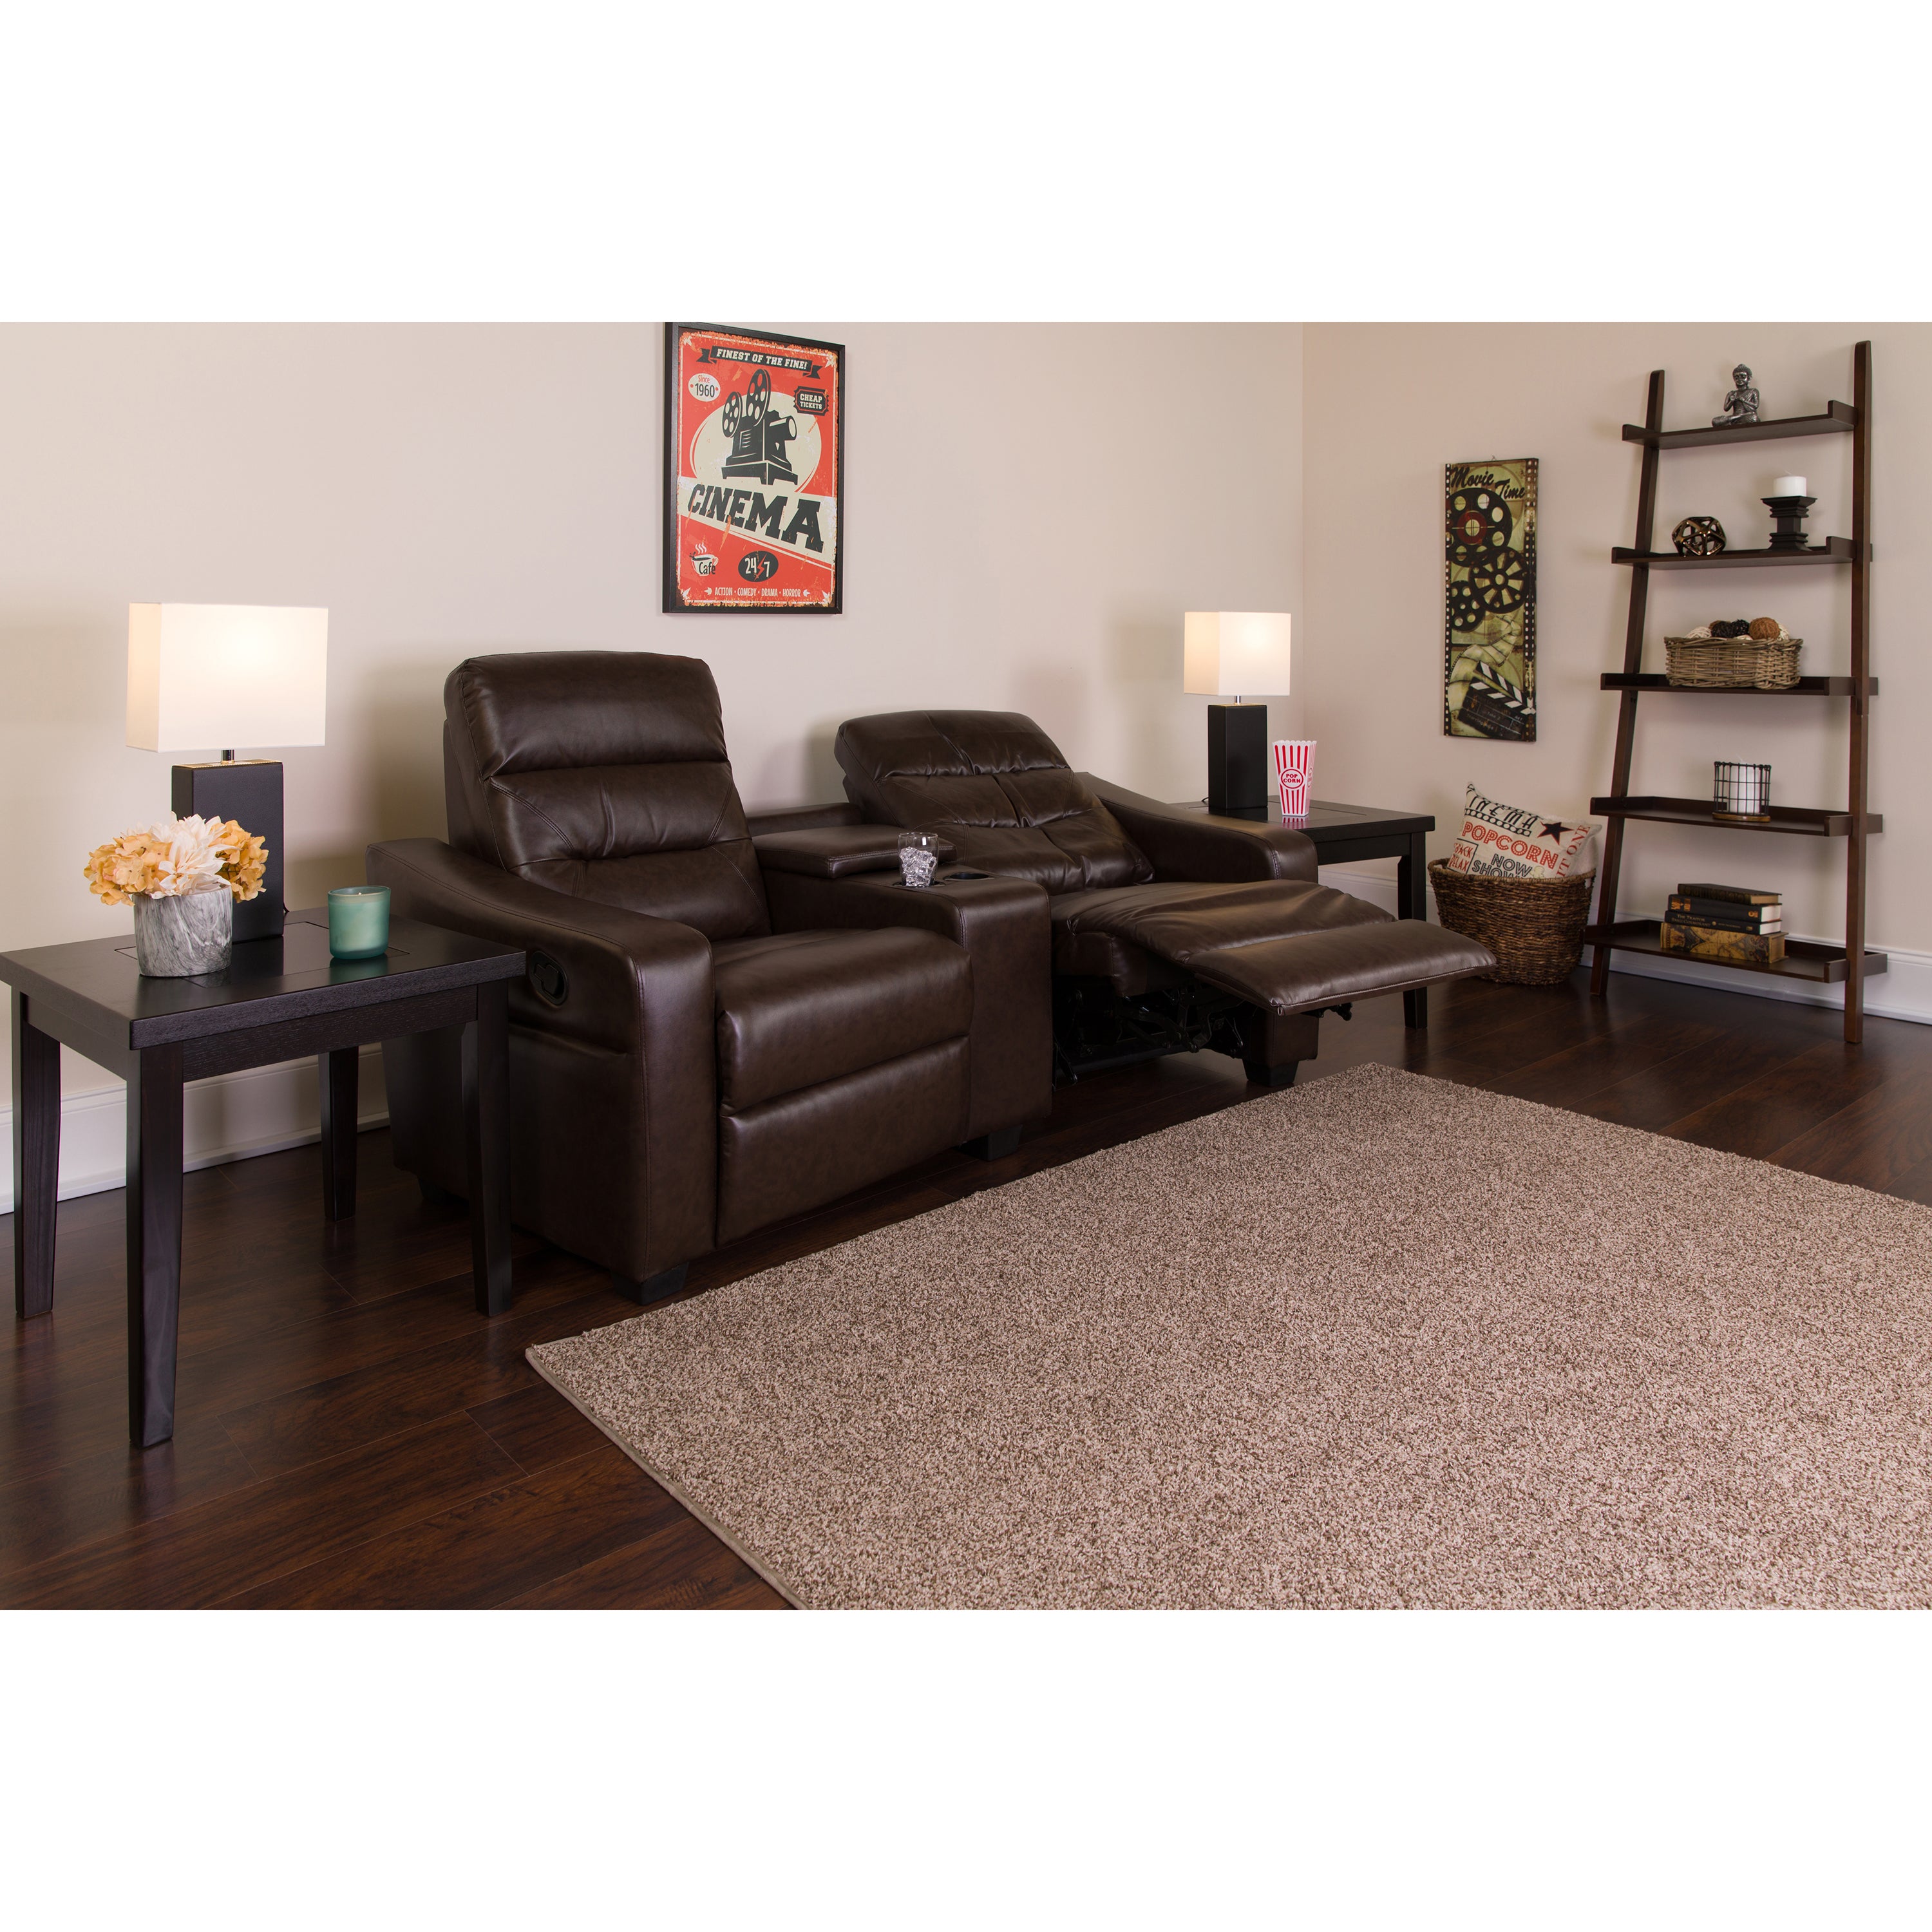 Futura Series 2-Seat Reclining Black LeatherSoft Tufted Bustle Back Theater Seating Unit with Cup Holders-Theater Seating-Flash Furniture-Wall2Wall Furnishings